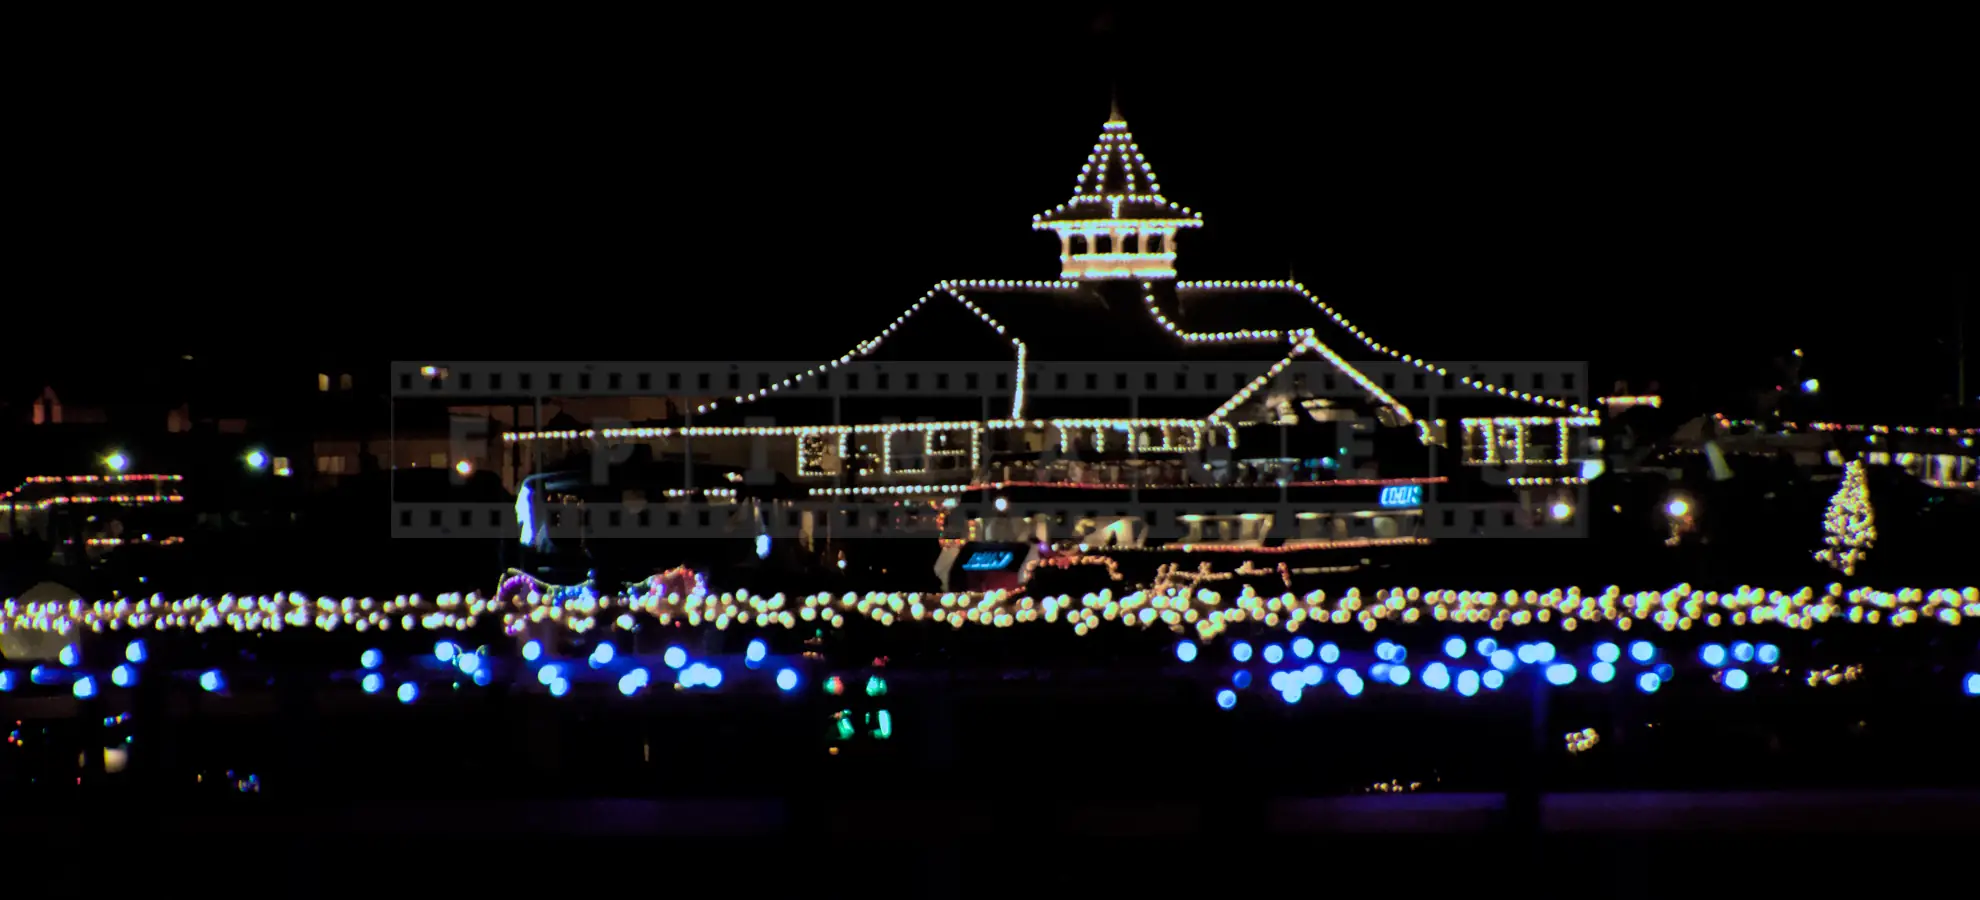 United States Sailing Center in Naples Island, California decorated for Christmas